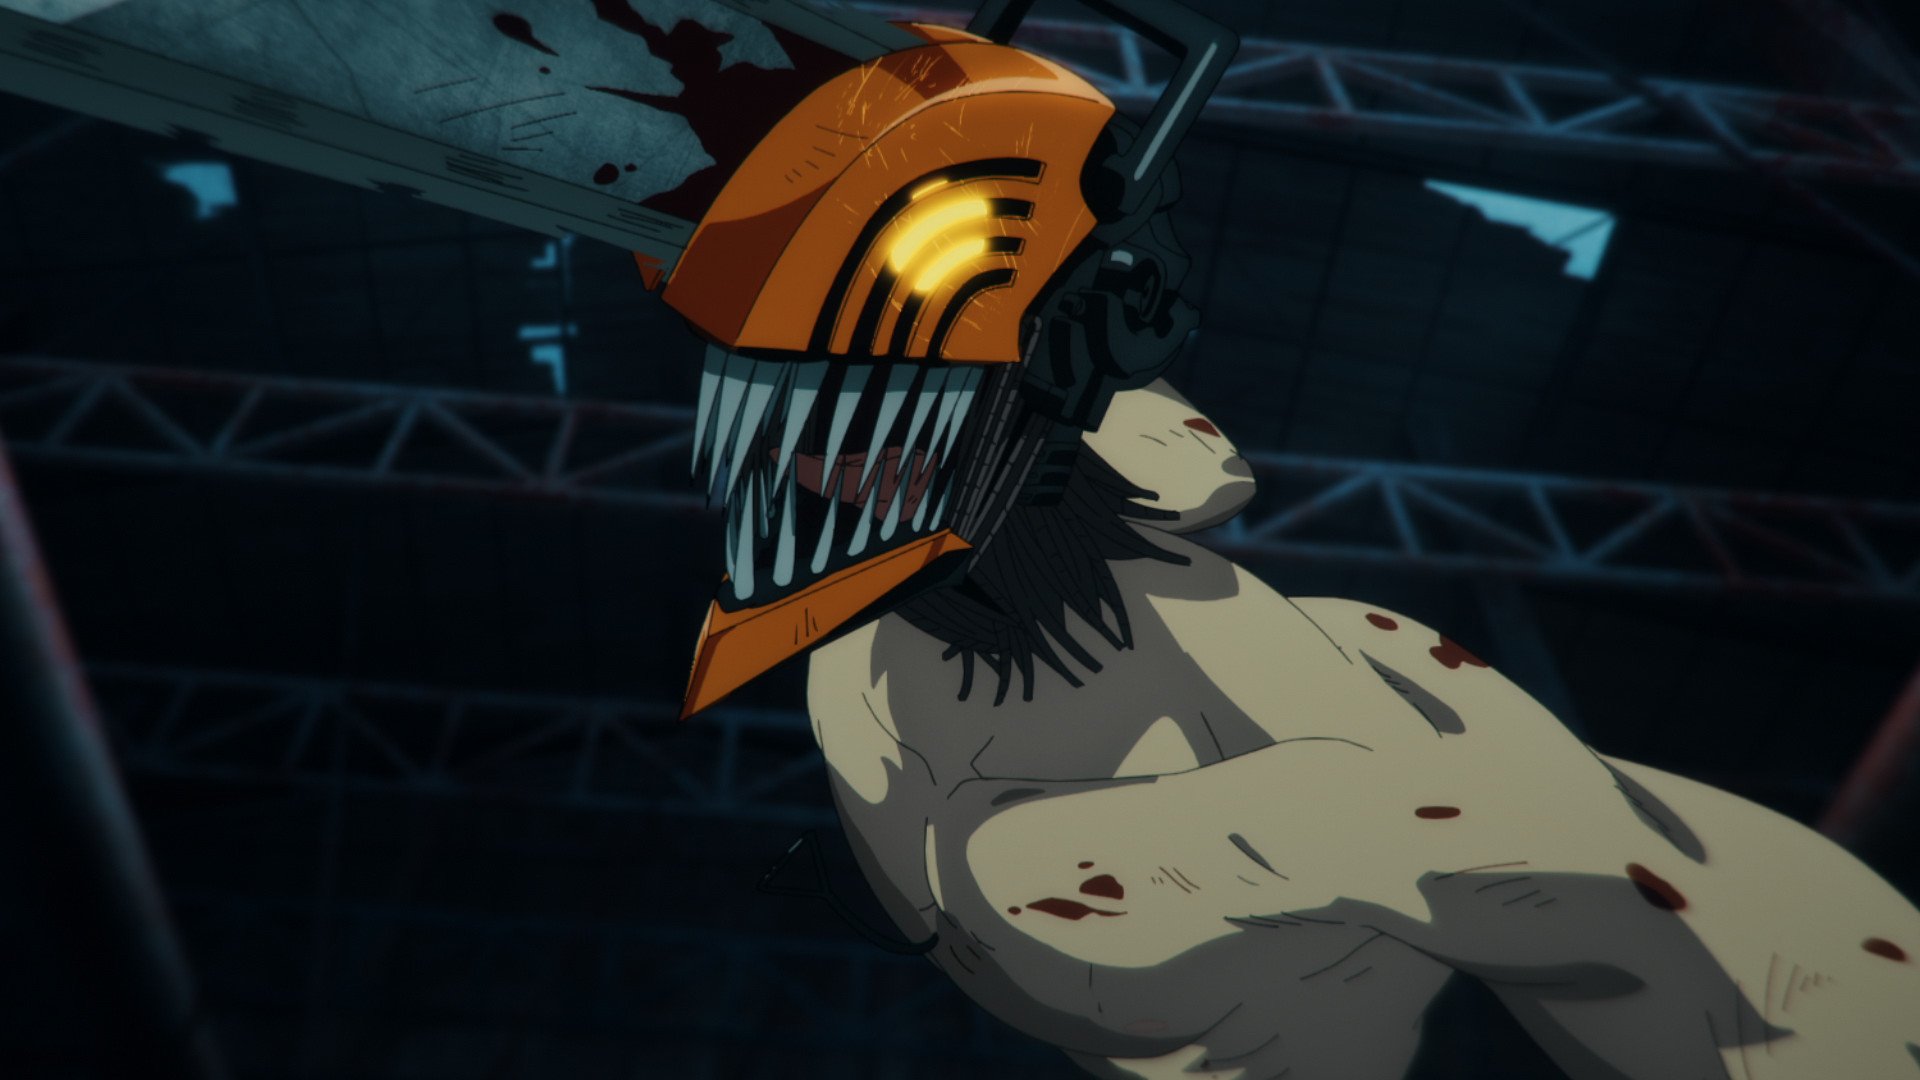 Denji in his Chainsaw Devil form in 'Chainsaw Man' for our list of horror anime. His head is an orange chainsaw, and he's got blood on his torso.